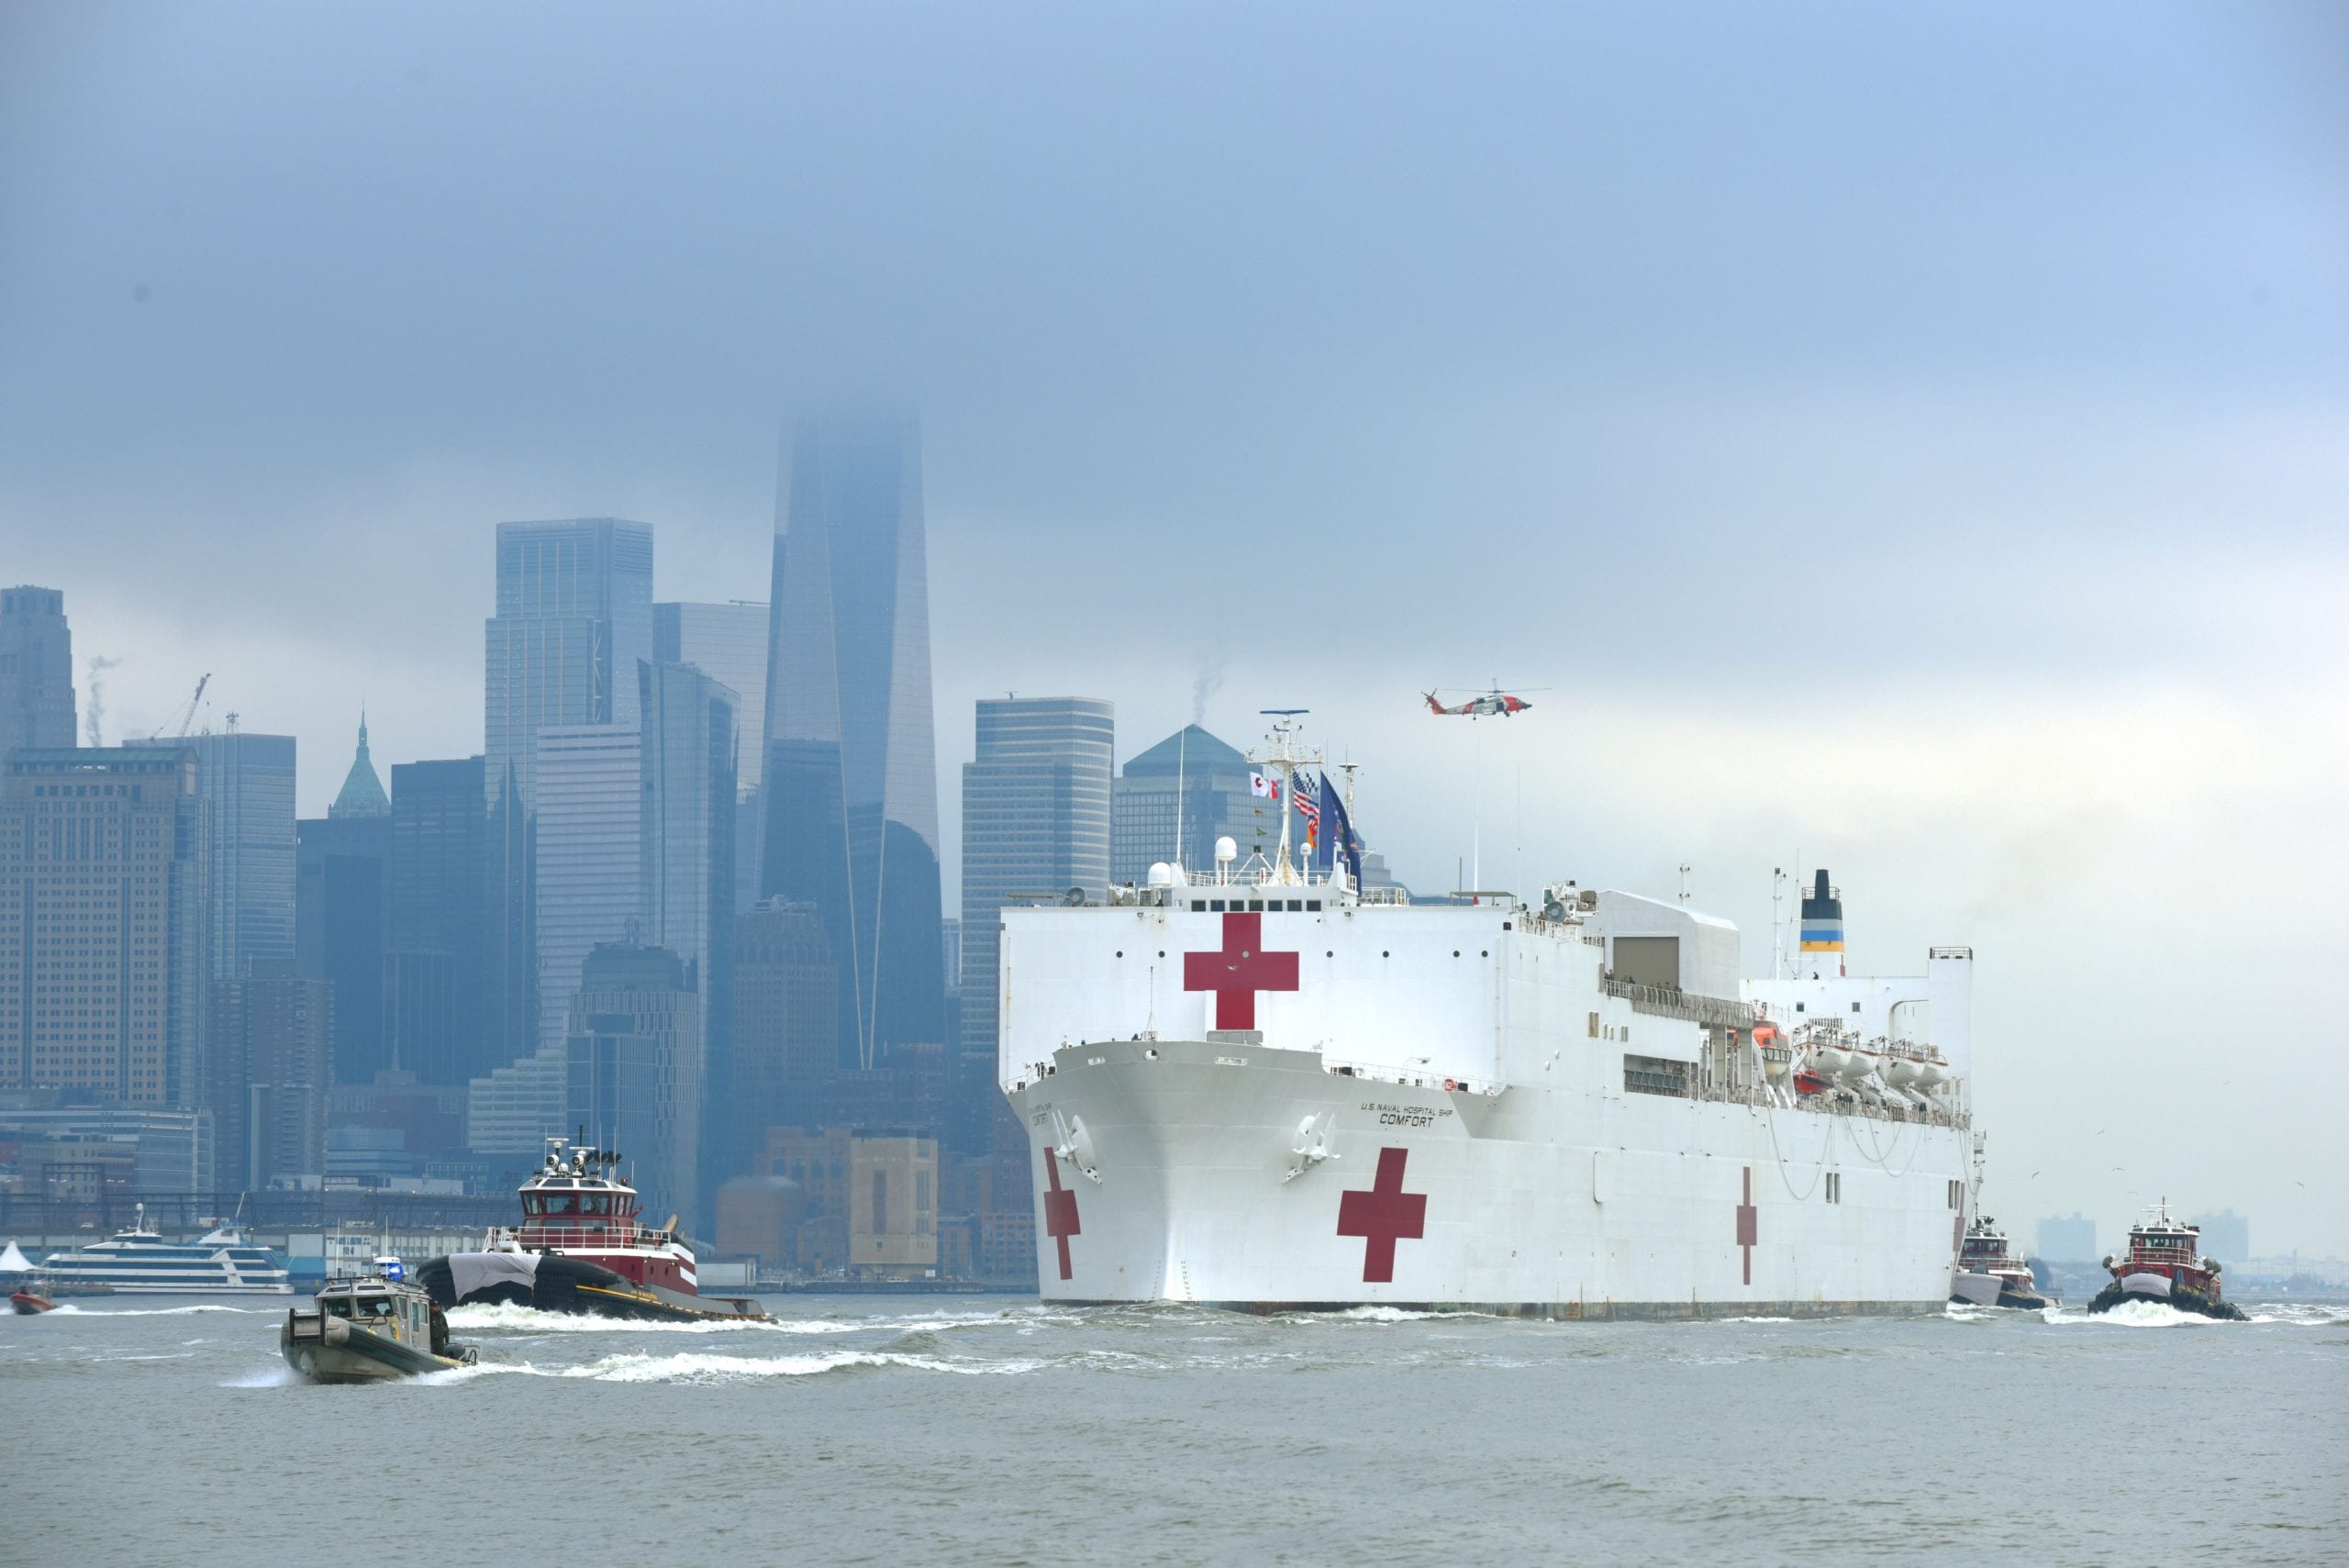 Philly Shipyard Wins Contract for Hospital Ship Design Study